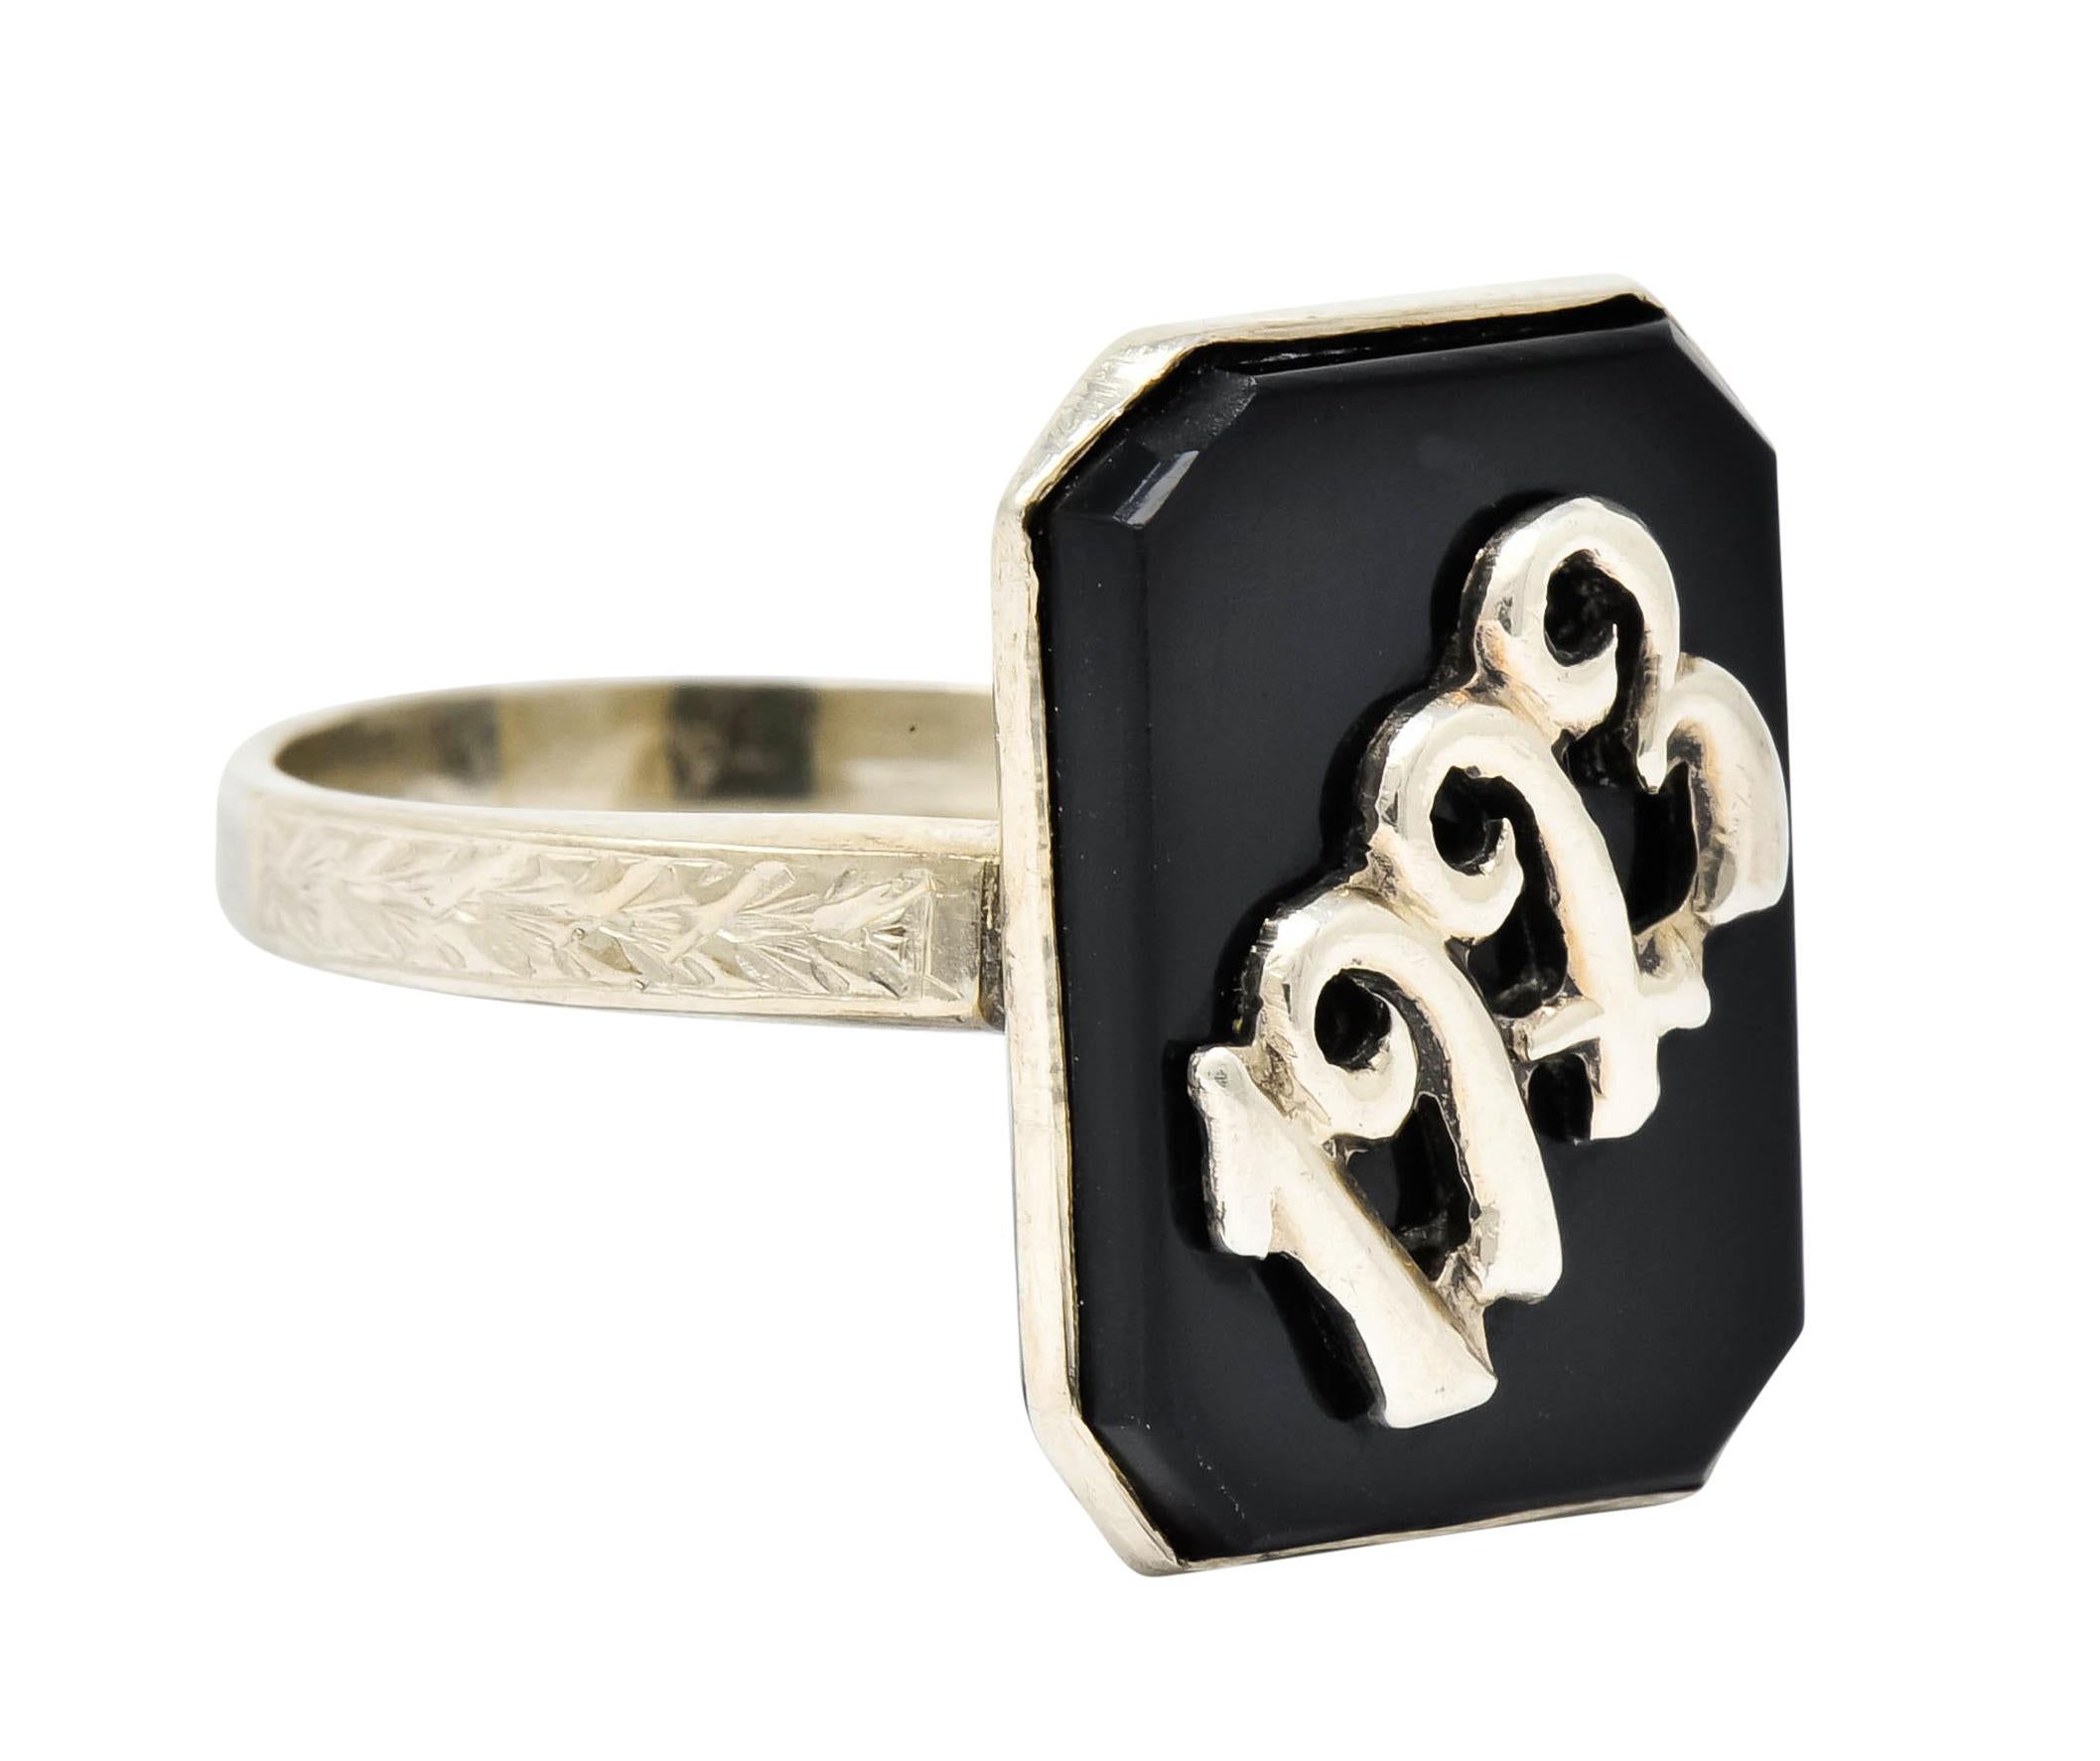 Ring designed as a bezel set octagonal onyx tablet, glossy opaque black in color with excellent luster

Centering the stylized white gold numerals '1923'

Flanked by deeply engraved foliate shoulders

Stamped 14k for 14 karat gold

Circa 1923

Ring